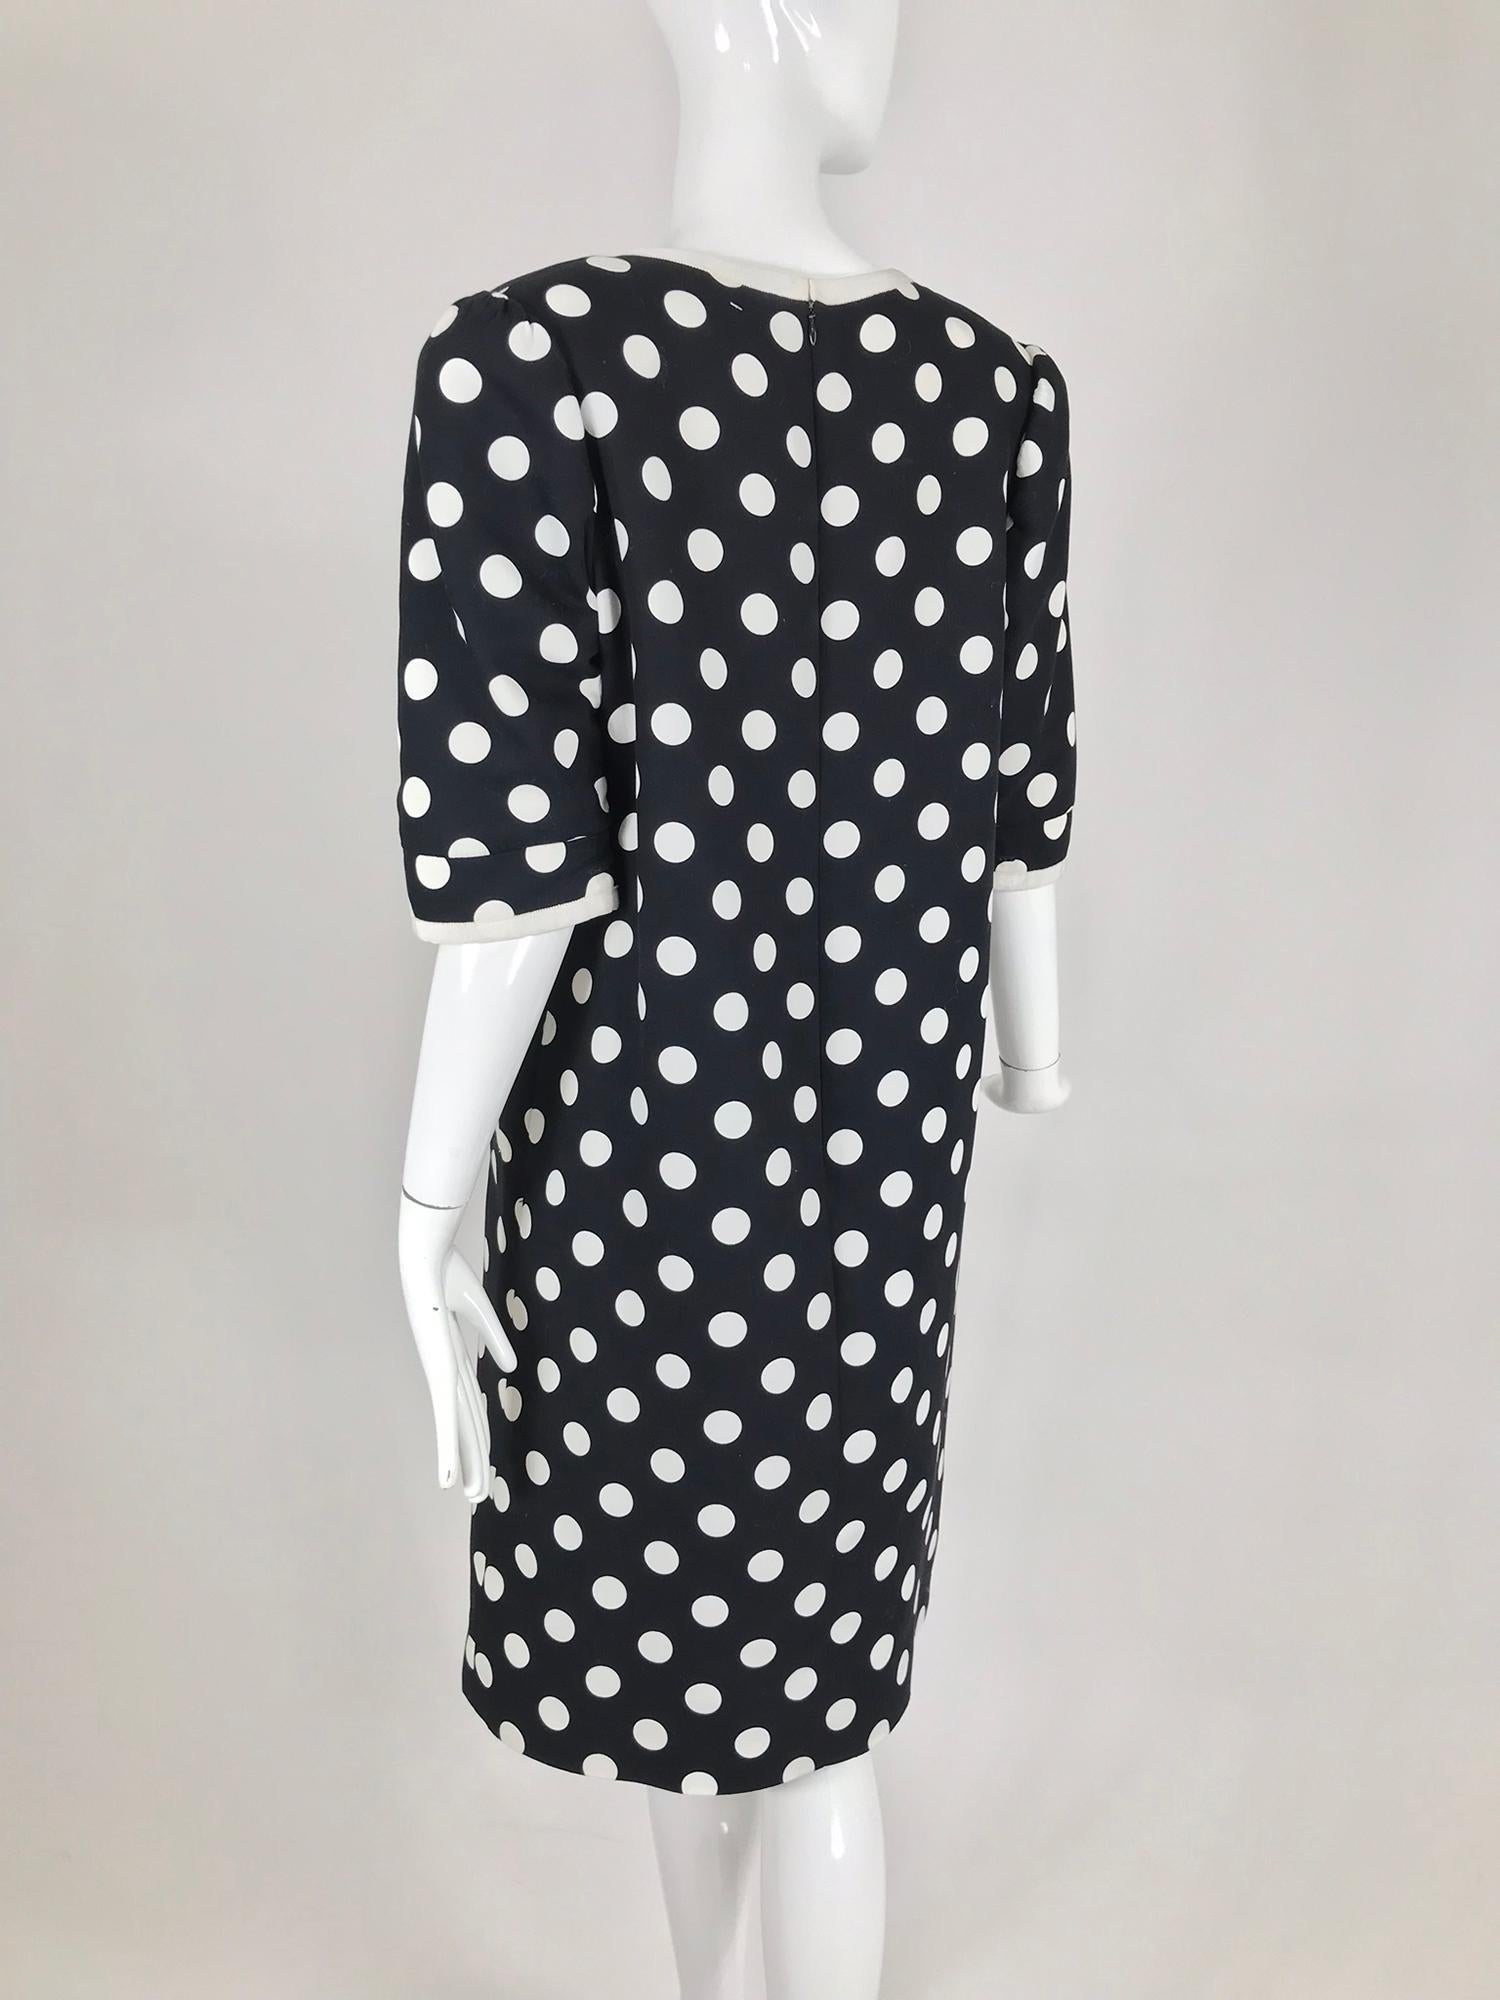 Givenchy Couture Black and White Cotton Polka Dot Day Dress 1980s For Sale 5